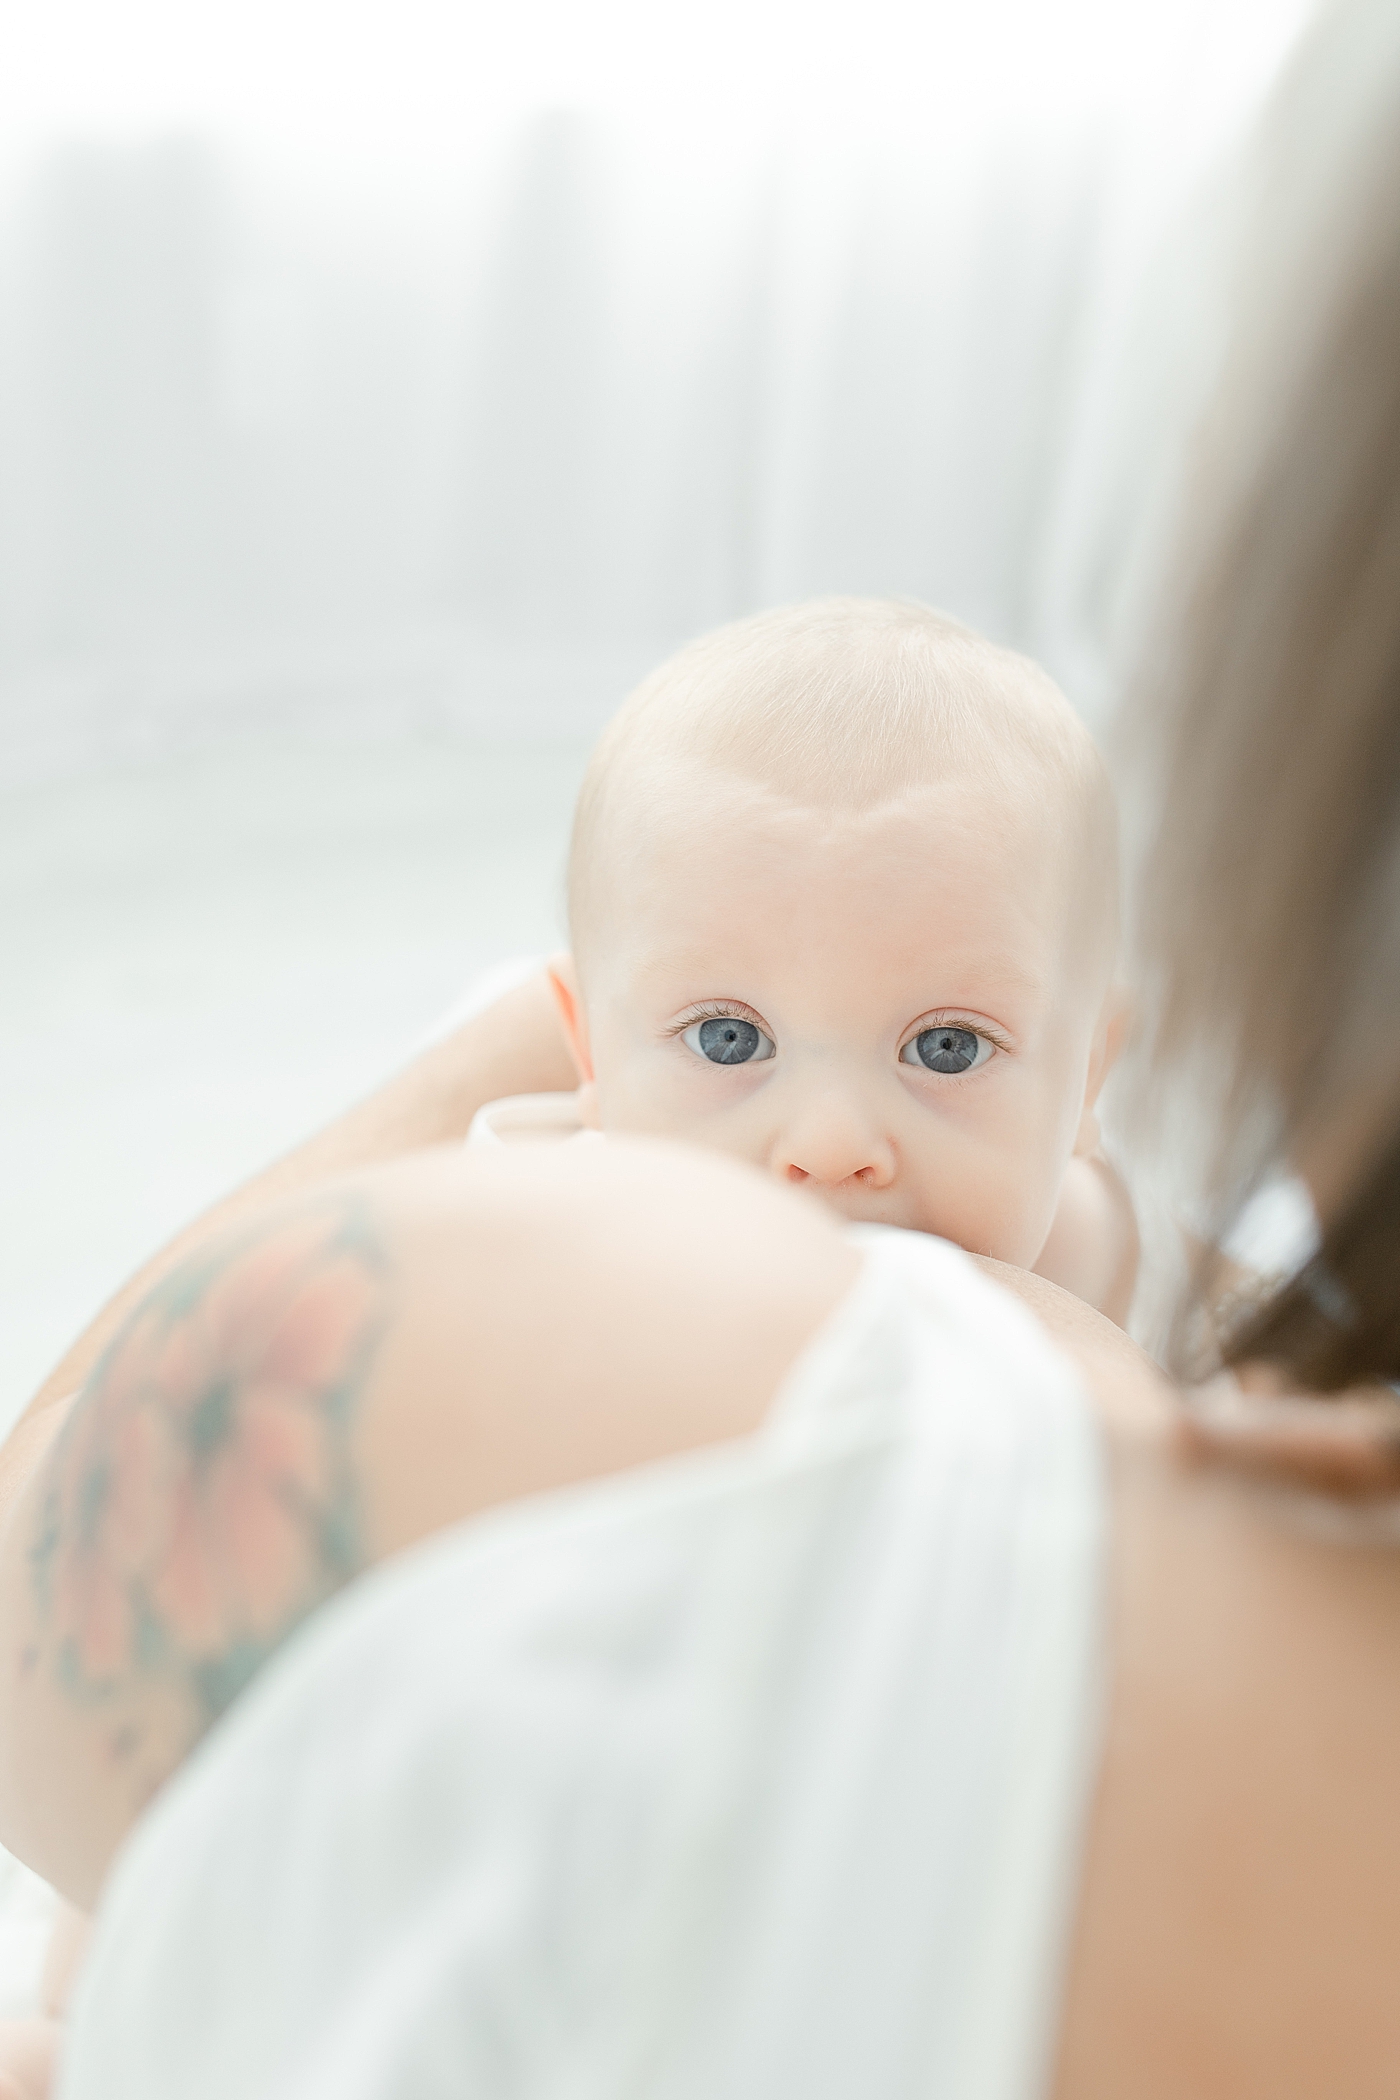 Baby boy looking over mom's shoulder while she breastfeeds | Photo by Little Sunshine Photography